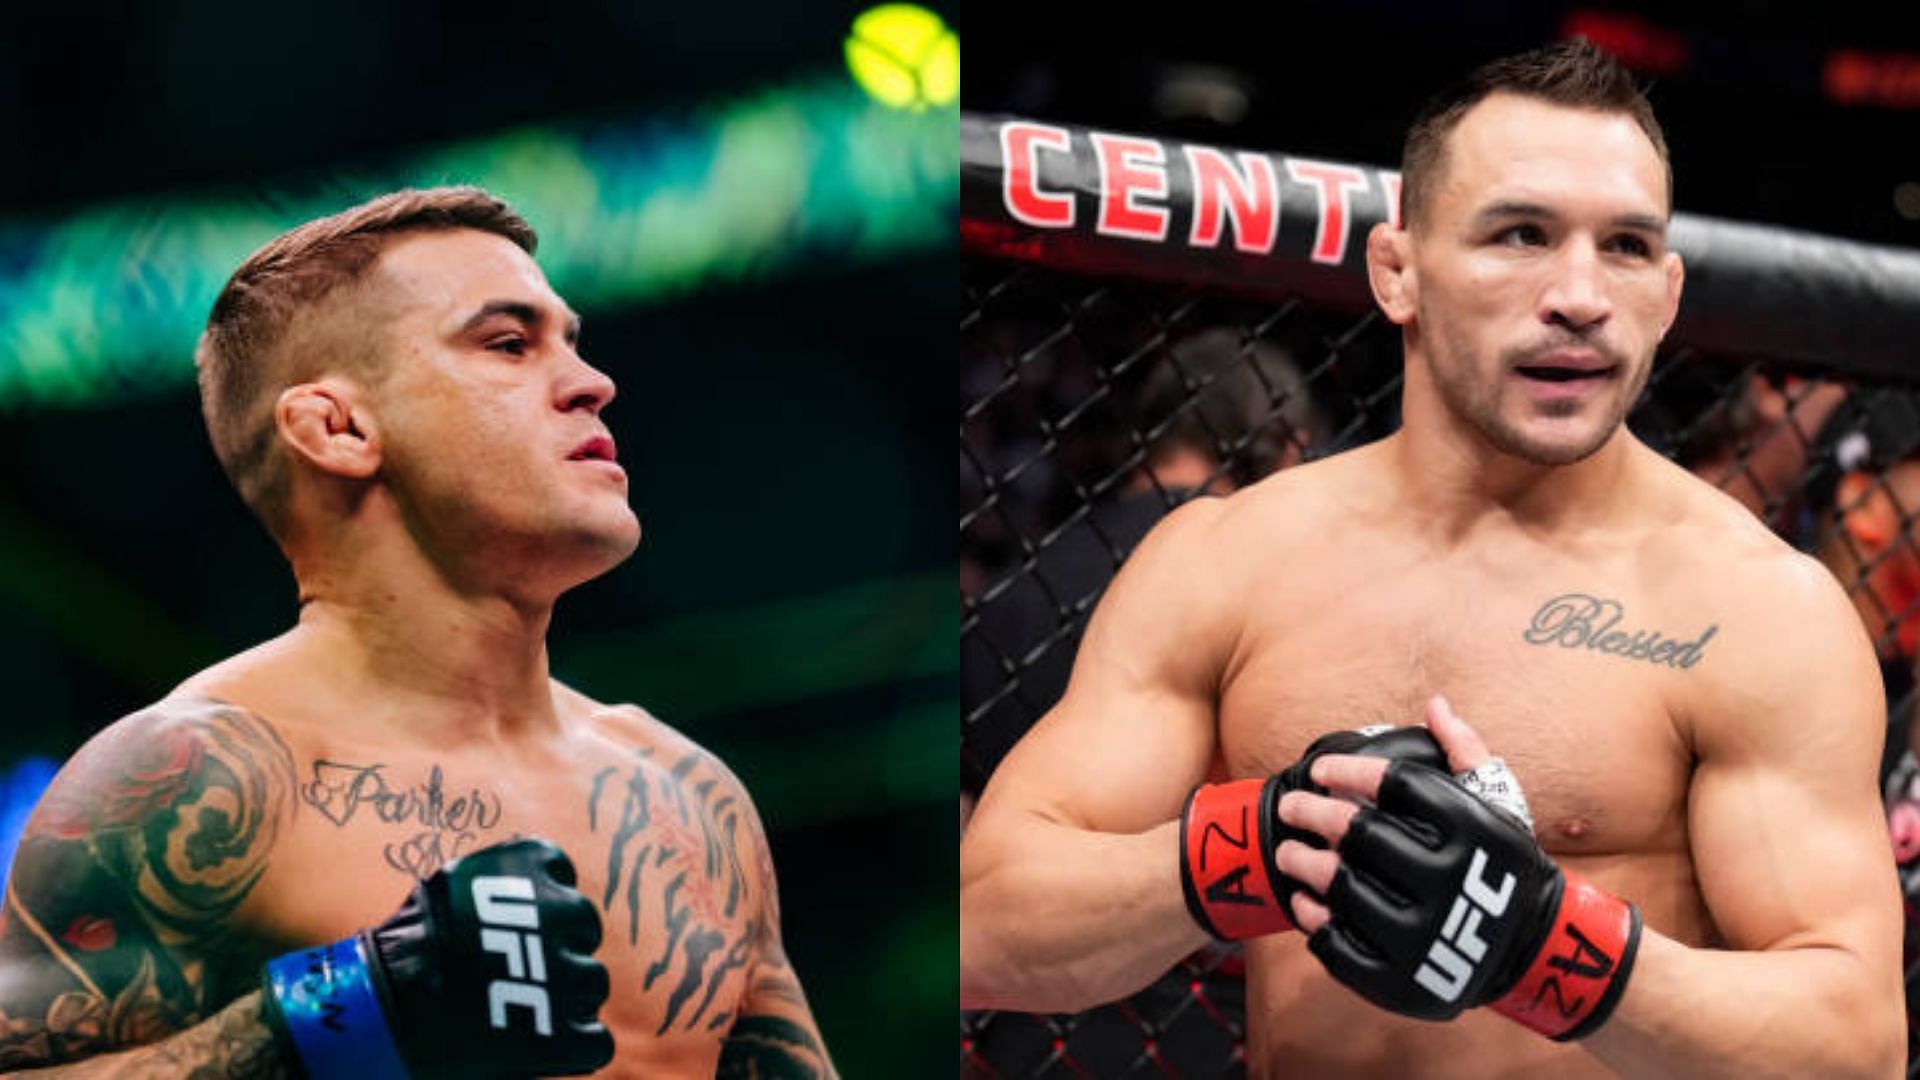 Poirier (L) is willing to make his return in the coming months, possibly against Michael Chandler (R).